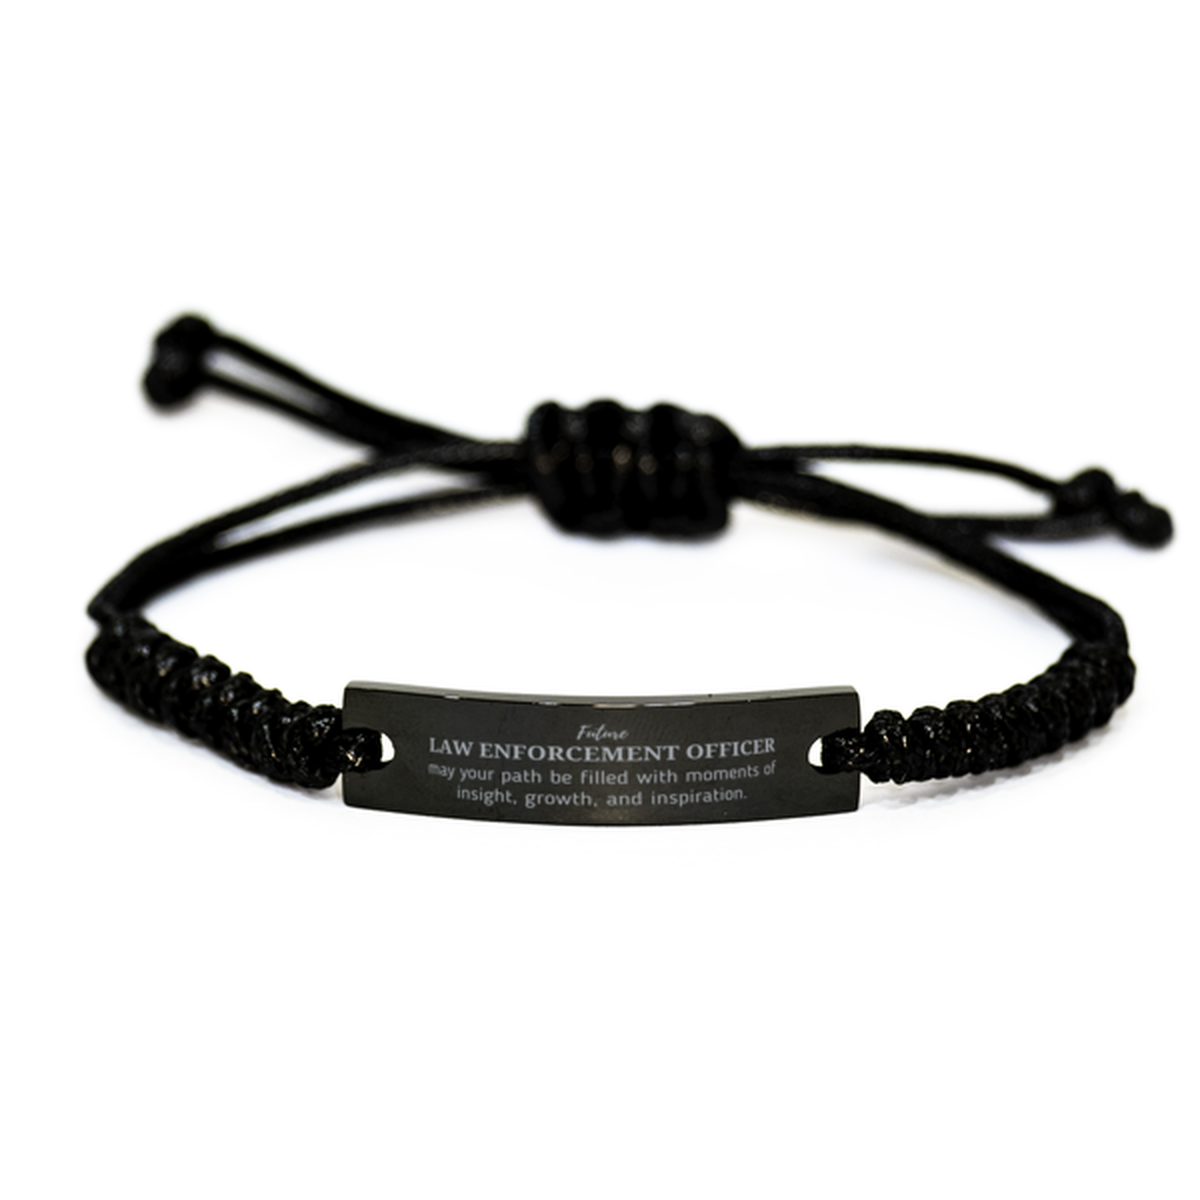 Future Law Enforcement Officer Gifts, May your path be filled with moments of insight, Graduation Gifts for New Law Enforcement Officer, Christmas Unique Black Rope Bracelet For Men, Women, Friends